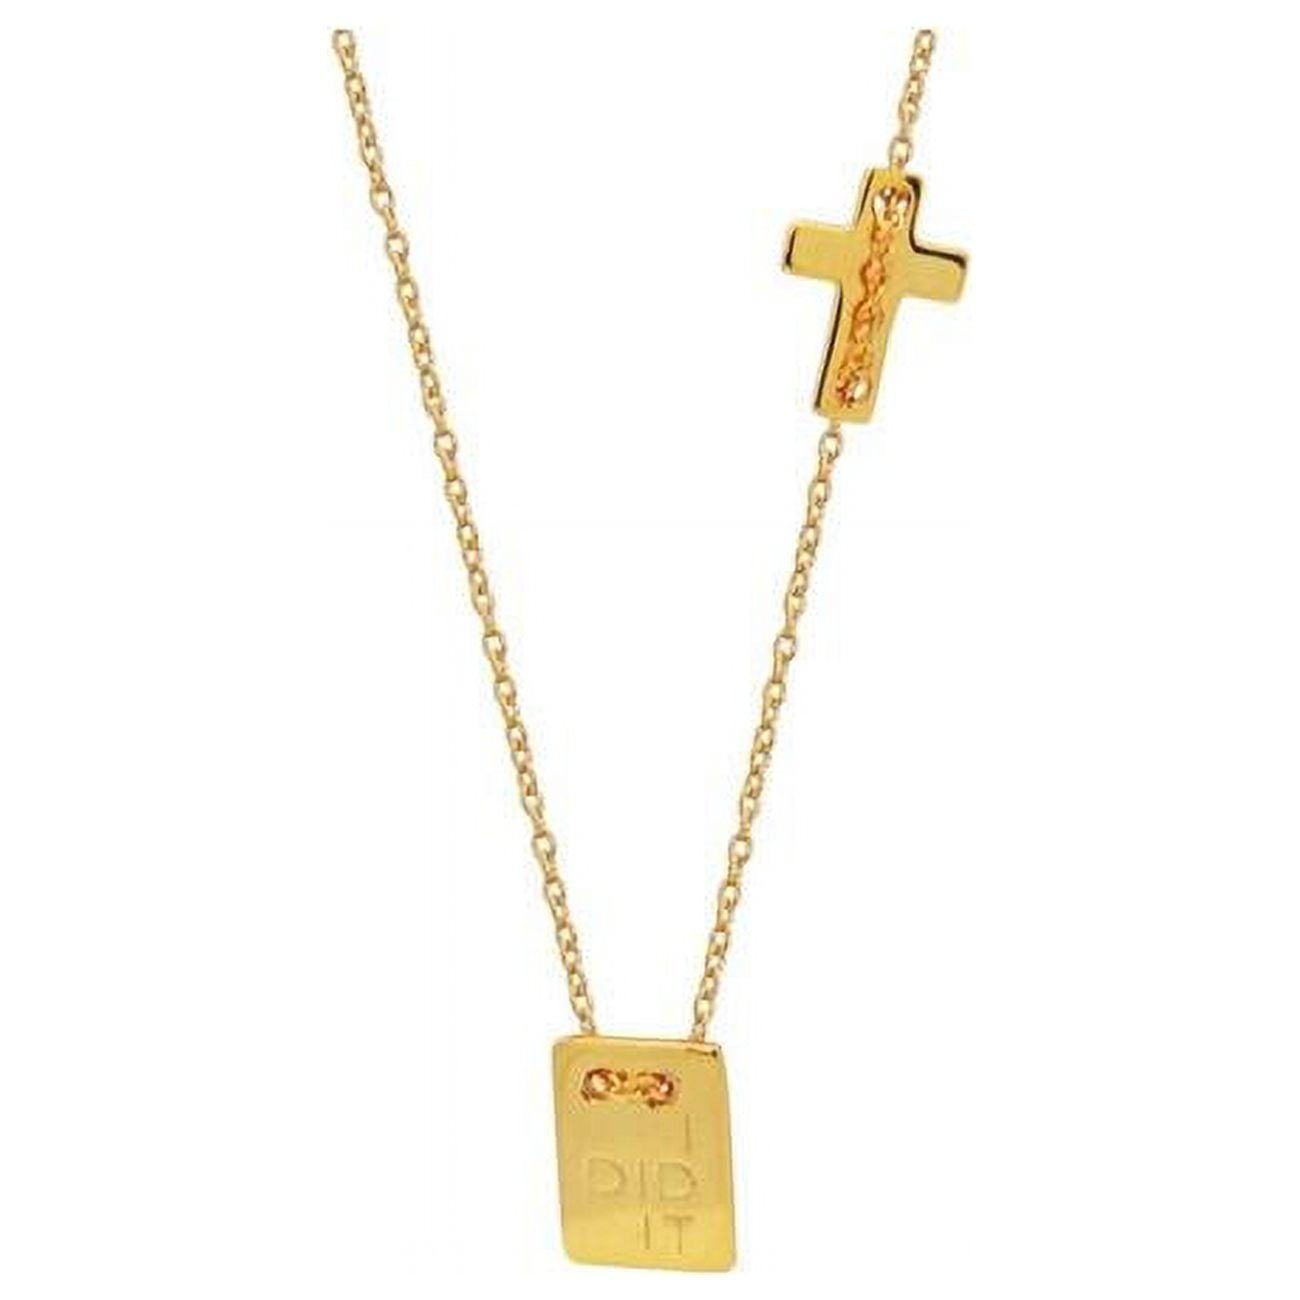 551186g 15.5 In. Celebration I Did It Gold Plaque Charm Sterling Silver Necklace